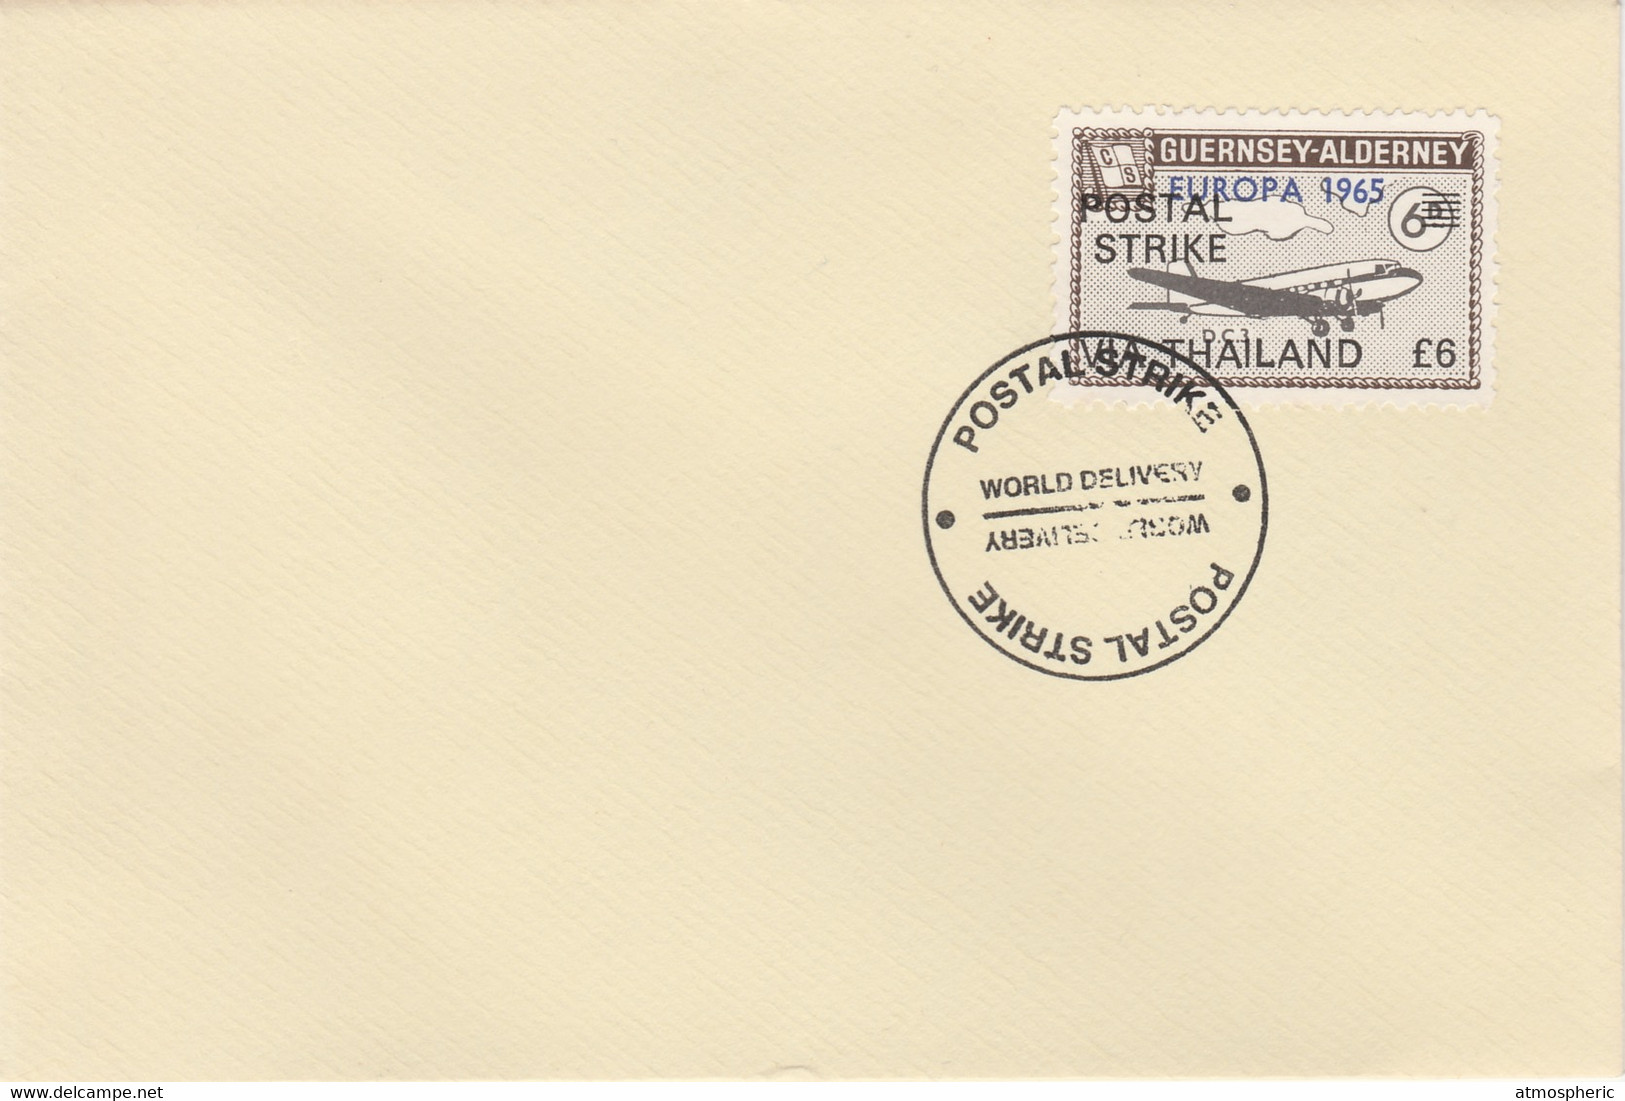 Guernsey - Alderney 1971 Postal Strike Cover To Thailand Bearing DC-3 6d Overprinted Europa 1965 - Non Classificati